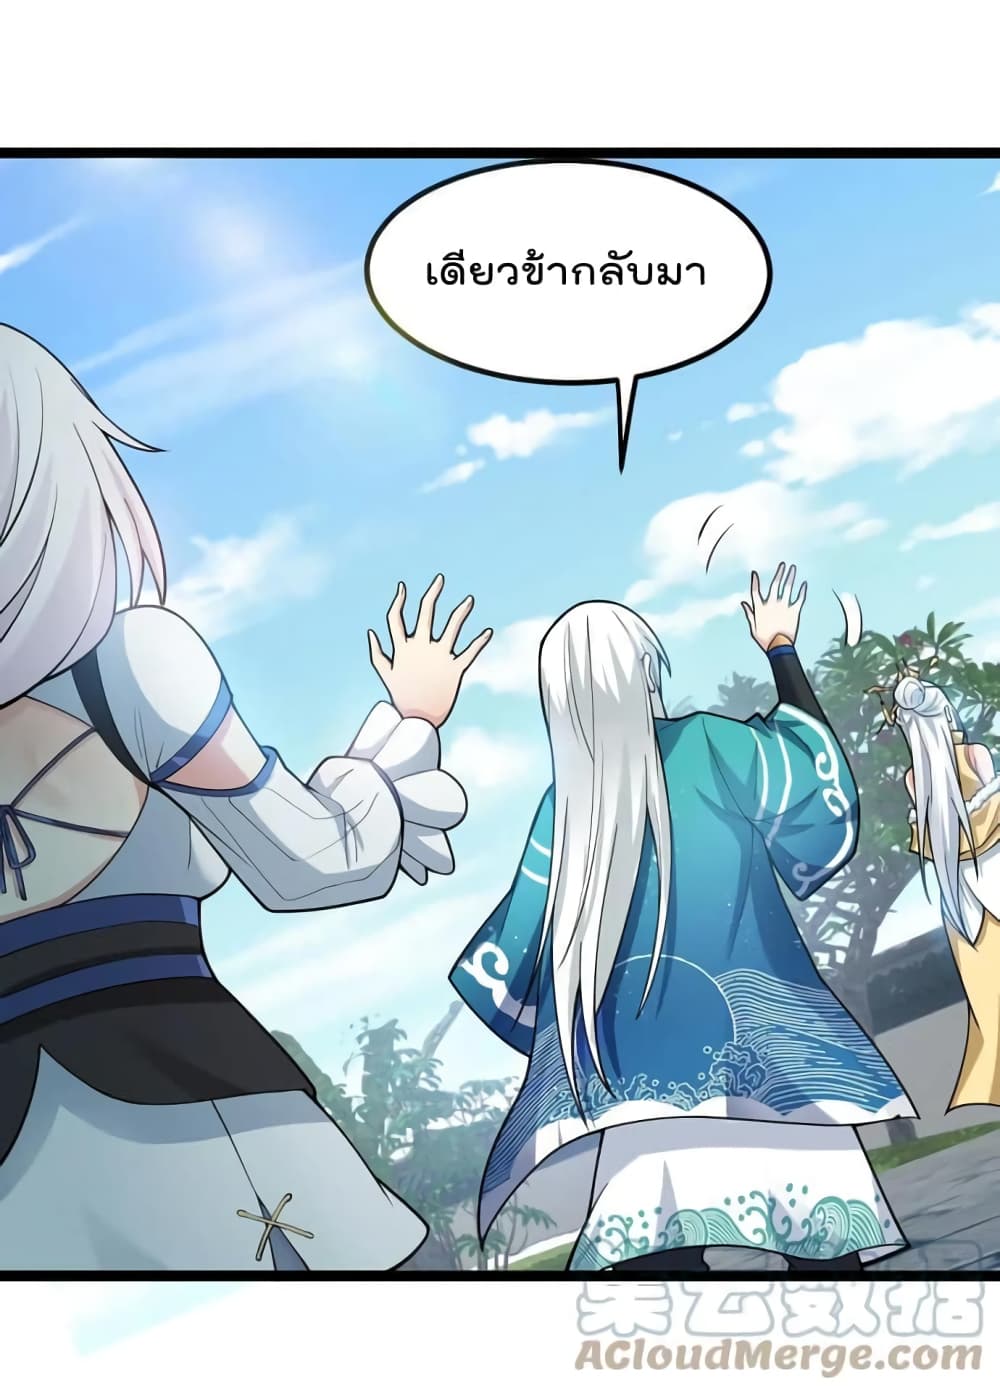 Godsian Masian from Another World ตอนที่ 116 (14)